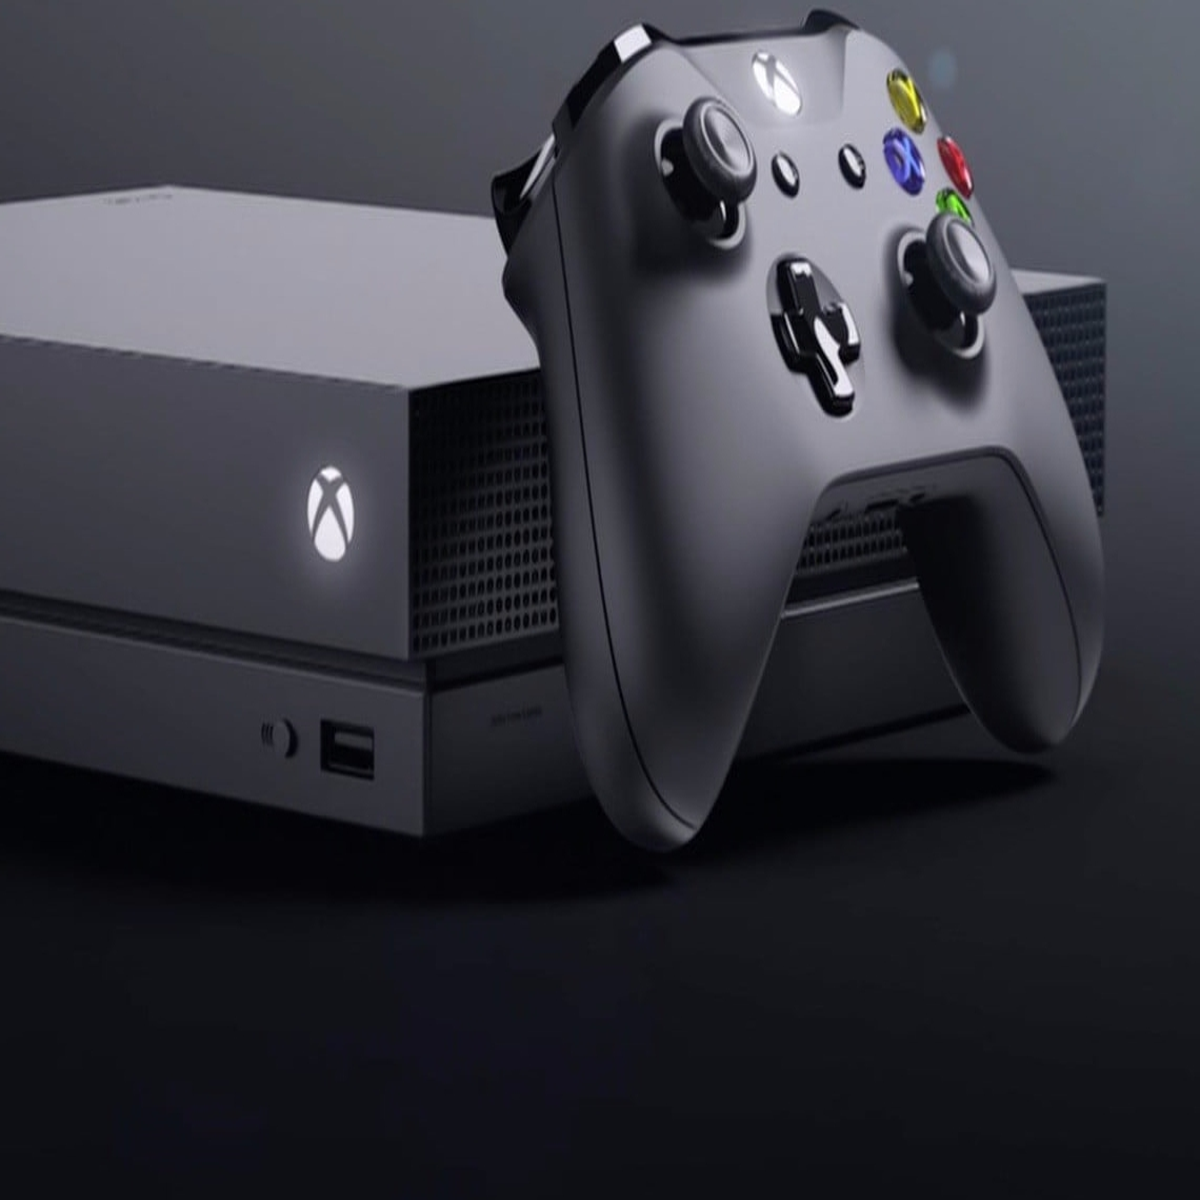 Xbox One X Review: The 4K Console You've Been Waiting For? 